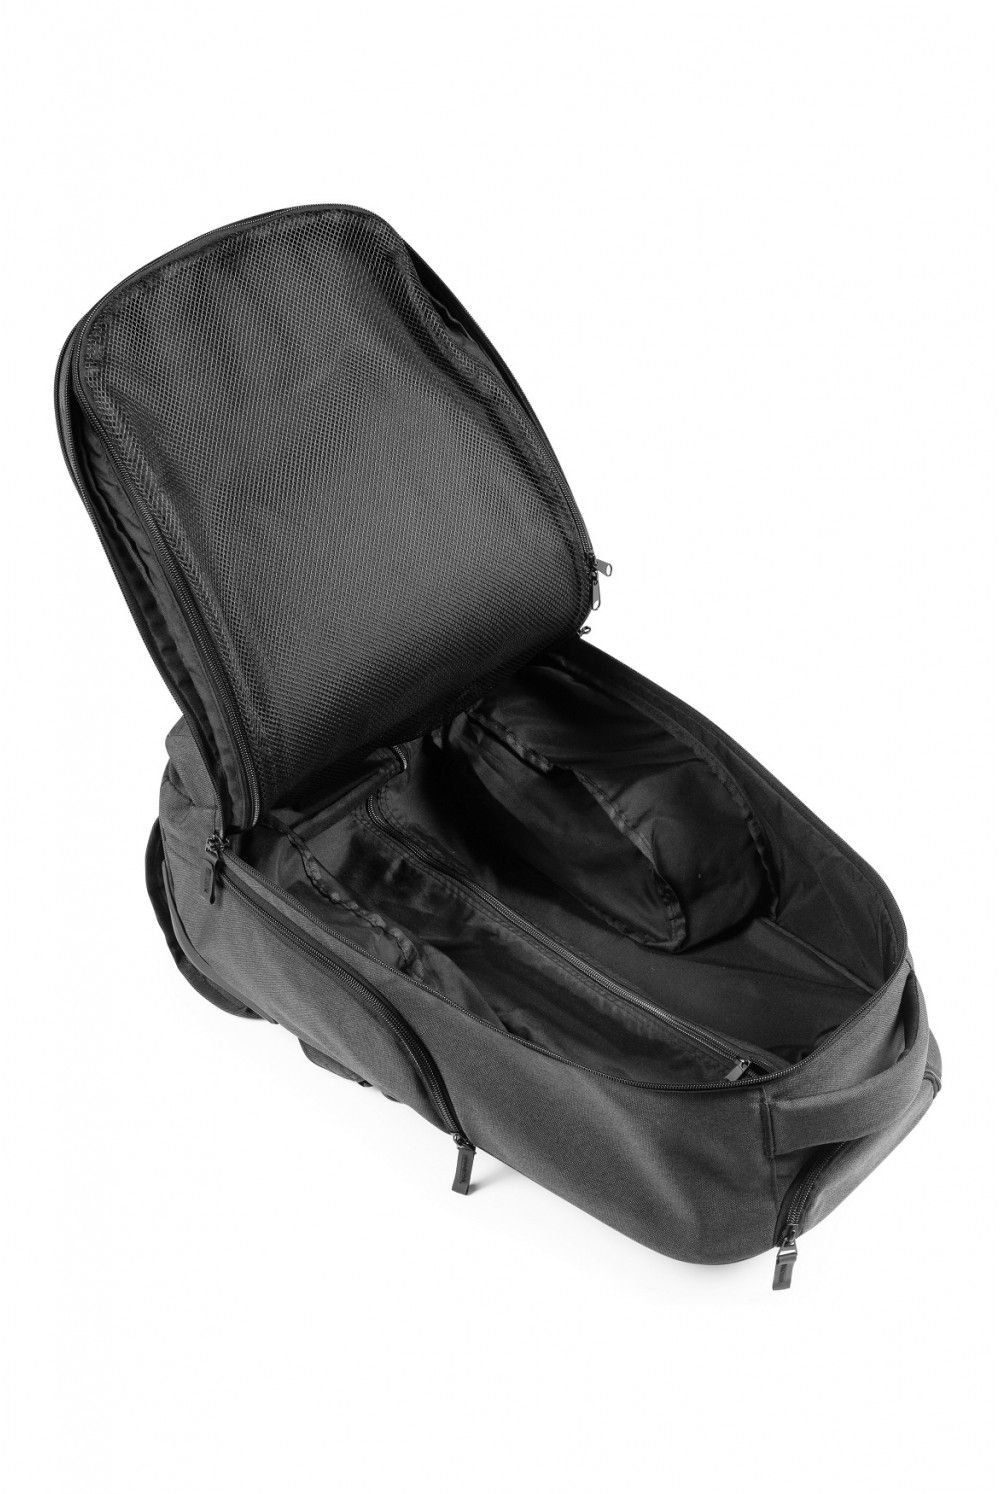 Epic laptop backpack with wheels Dynamik